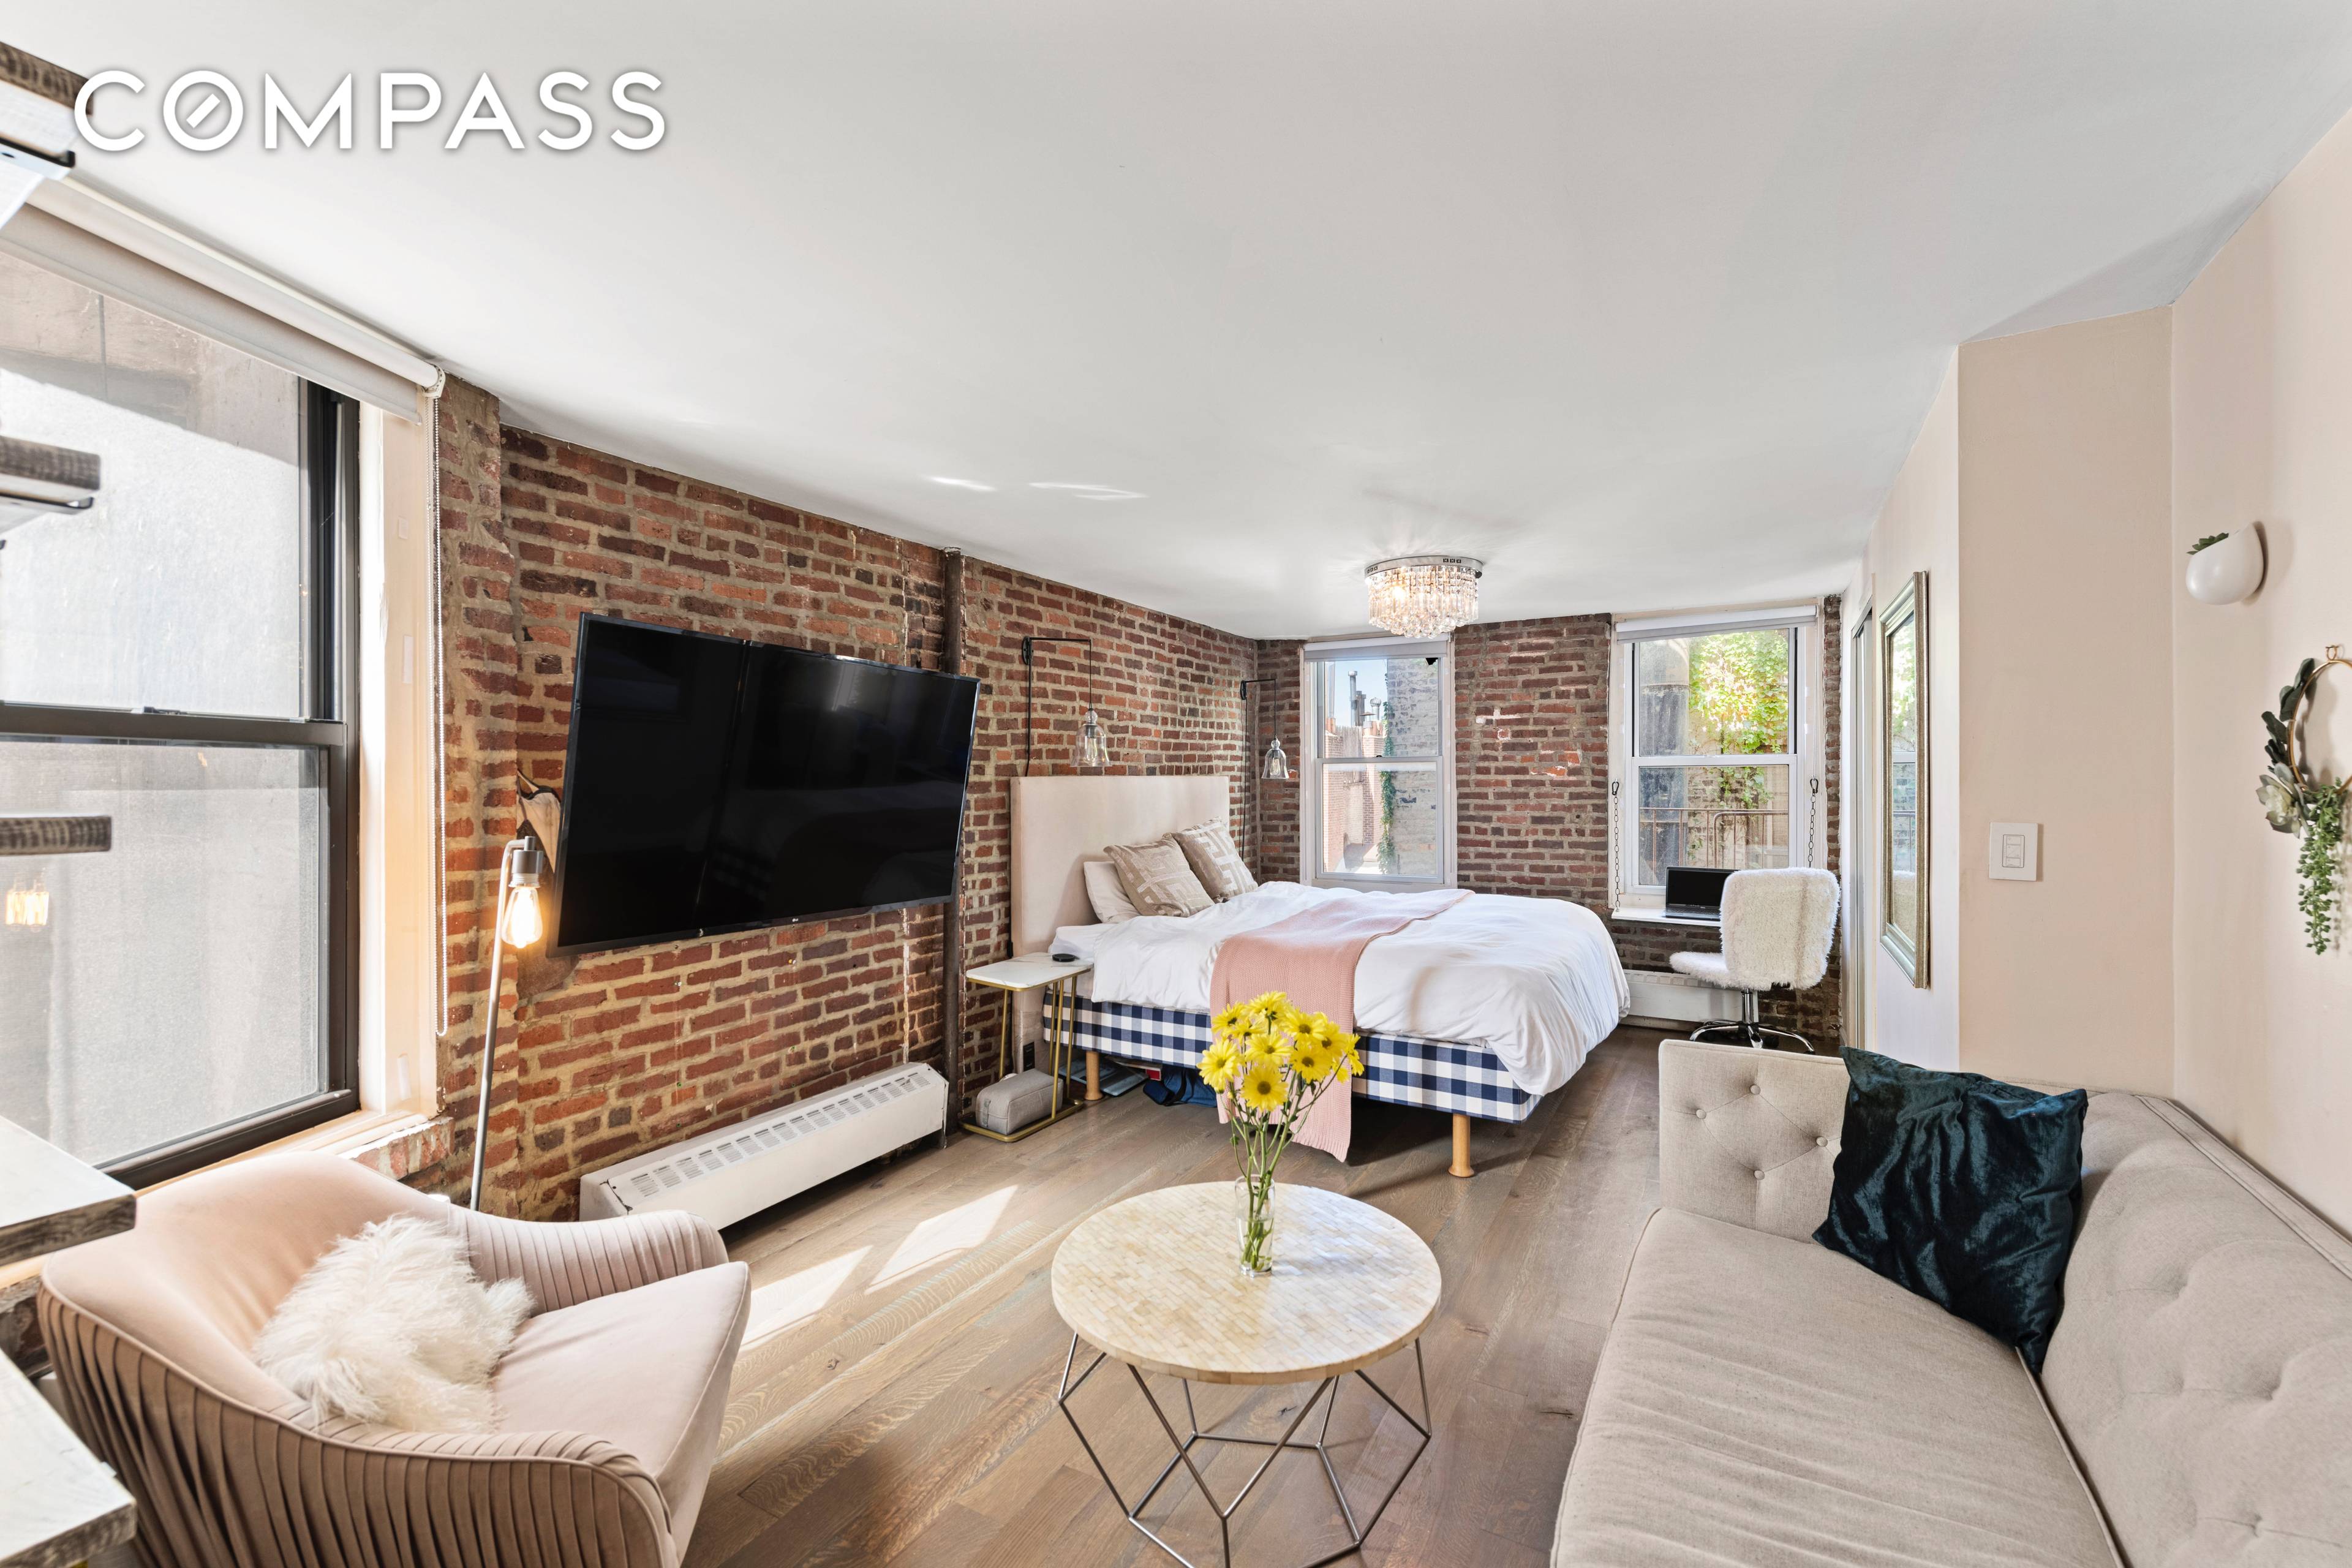 Pre war charm meets modern upgrades in this beautifully updated home on one of the most charming blocks of West Village on a high floor of an elevator building.